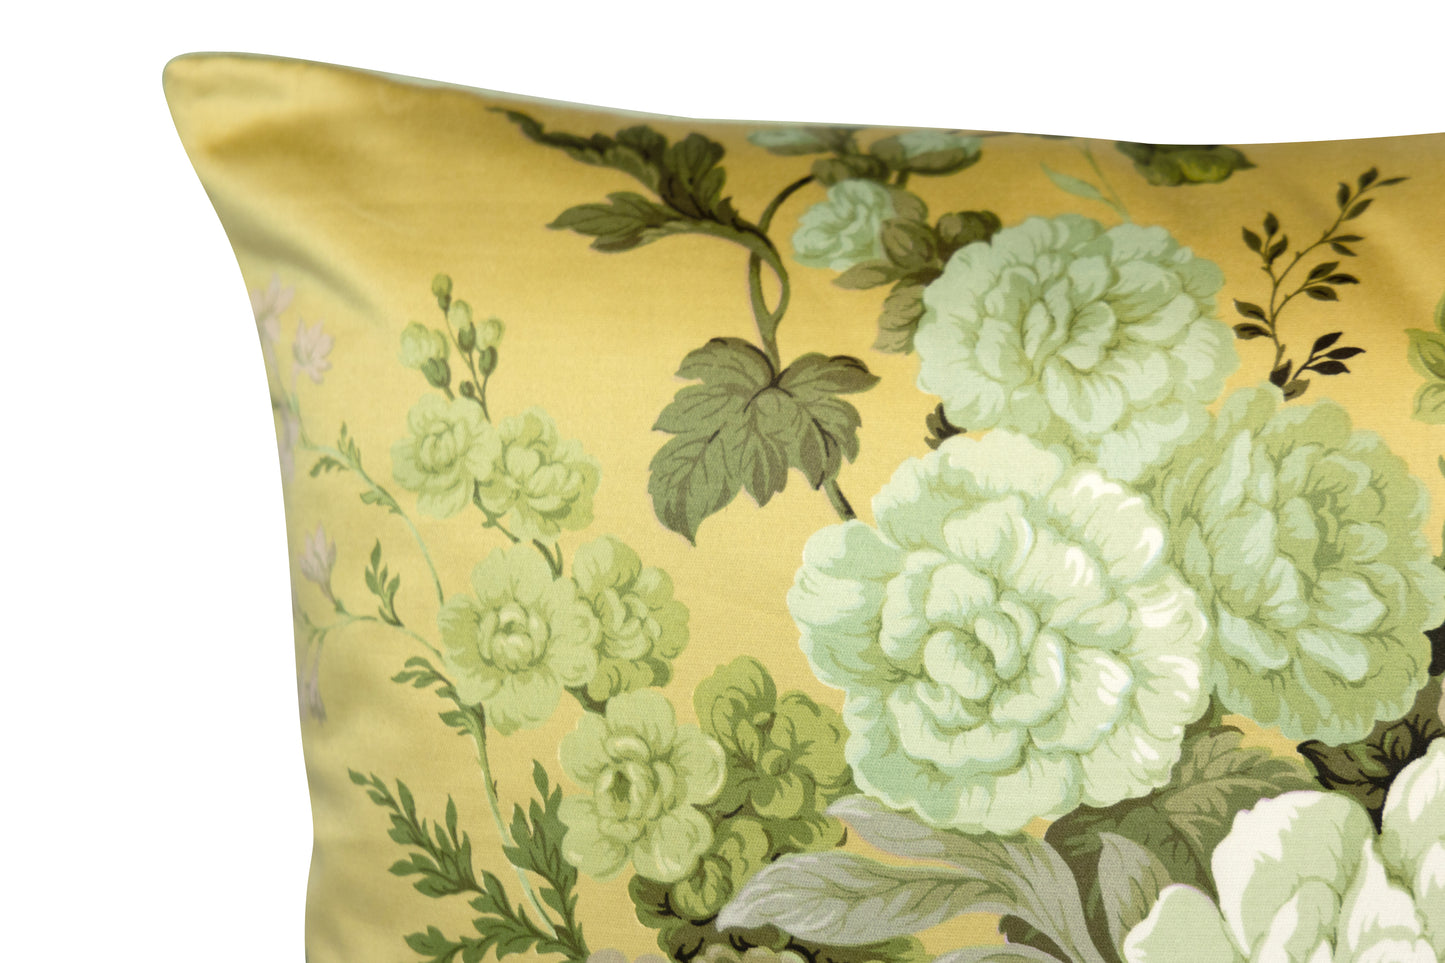 Vintage Cotton Satin Cushion Cover in “Antique Gold” by Sanderson